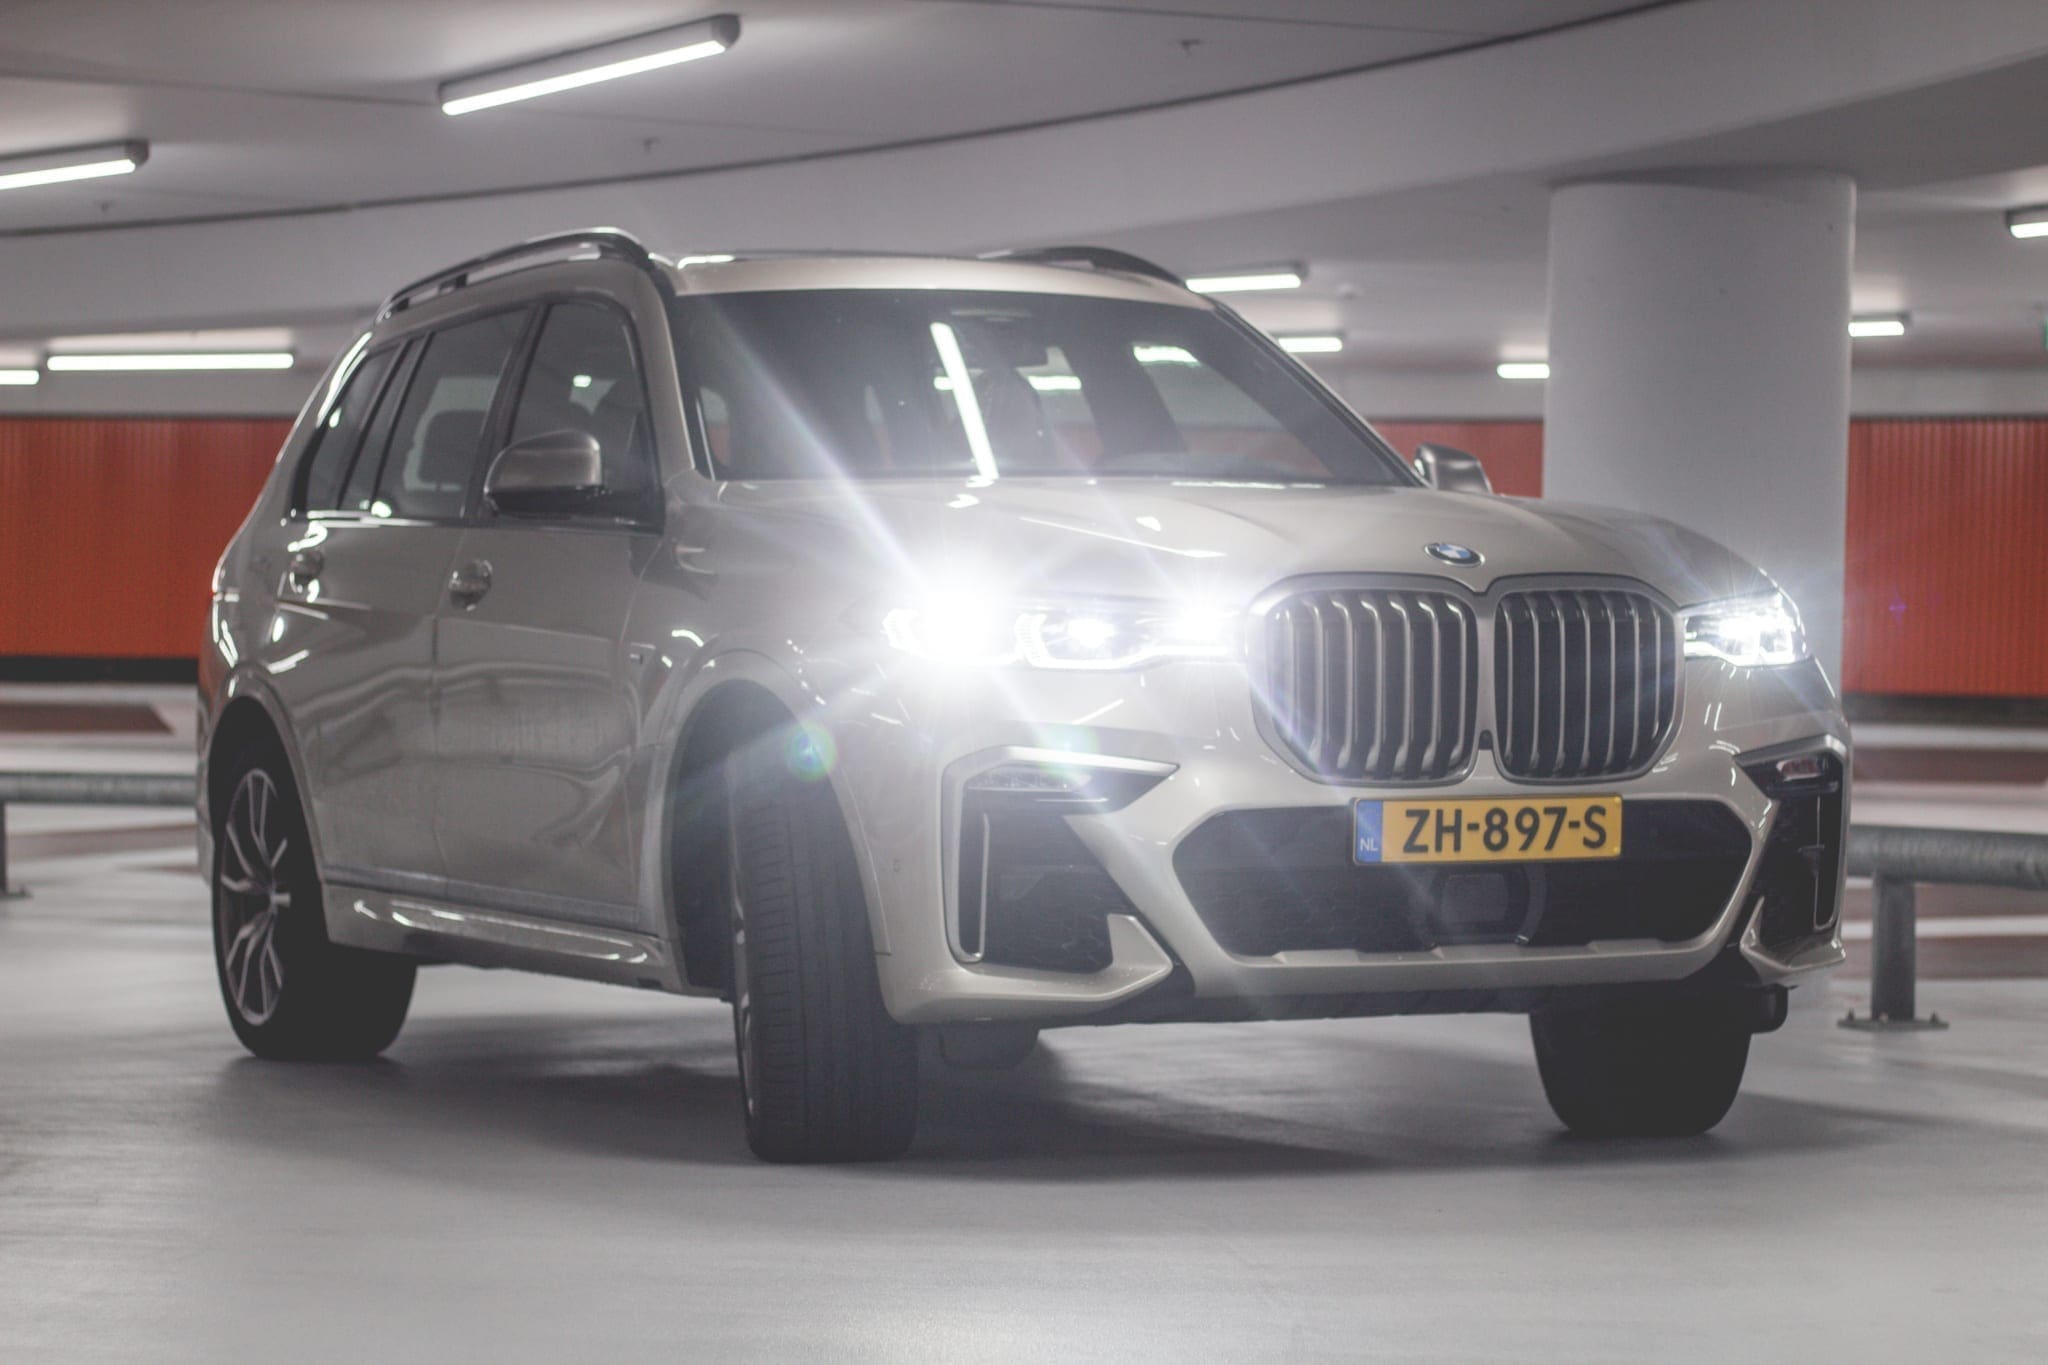 BMW X7, T(h)ank you BMW for the X7 M50d!